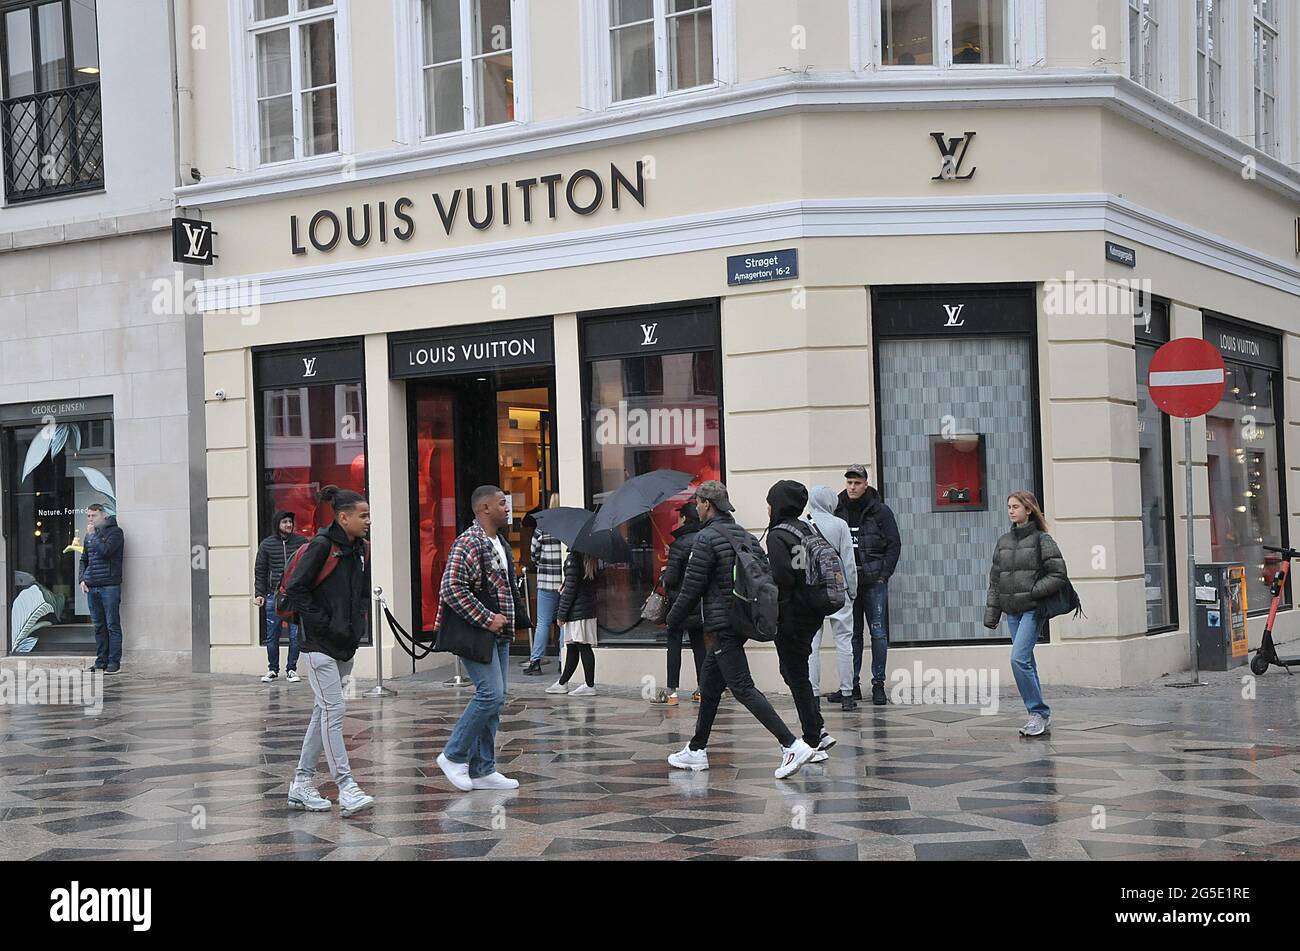 Copenhagen, Denmark. 18 March 2021, Louis Vuitton opens for business after  such long time of